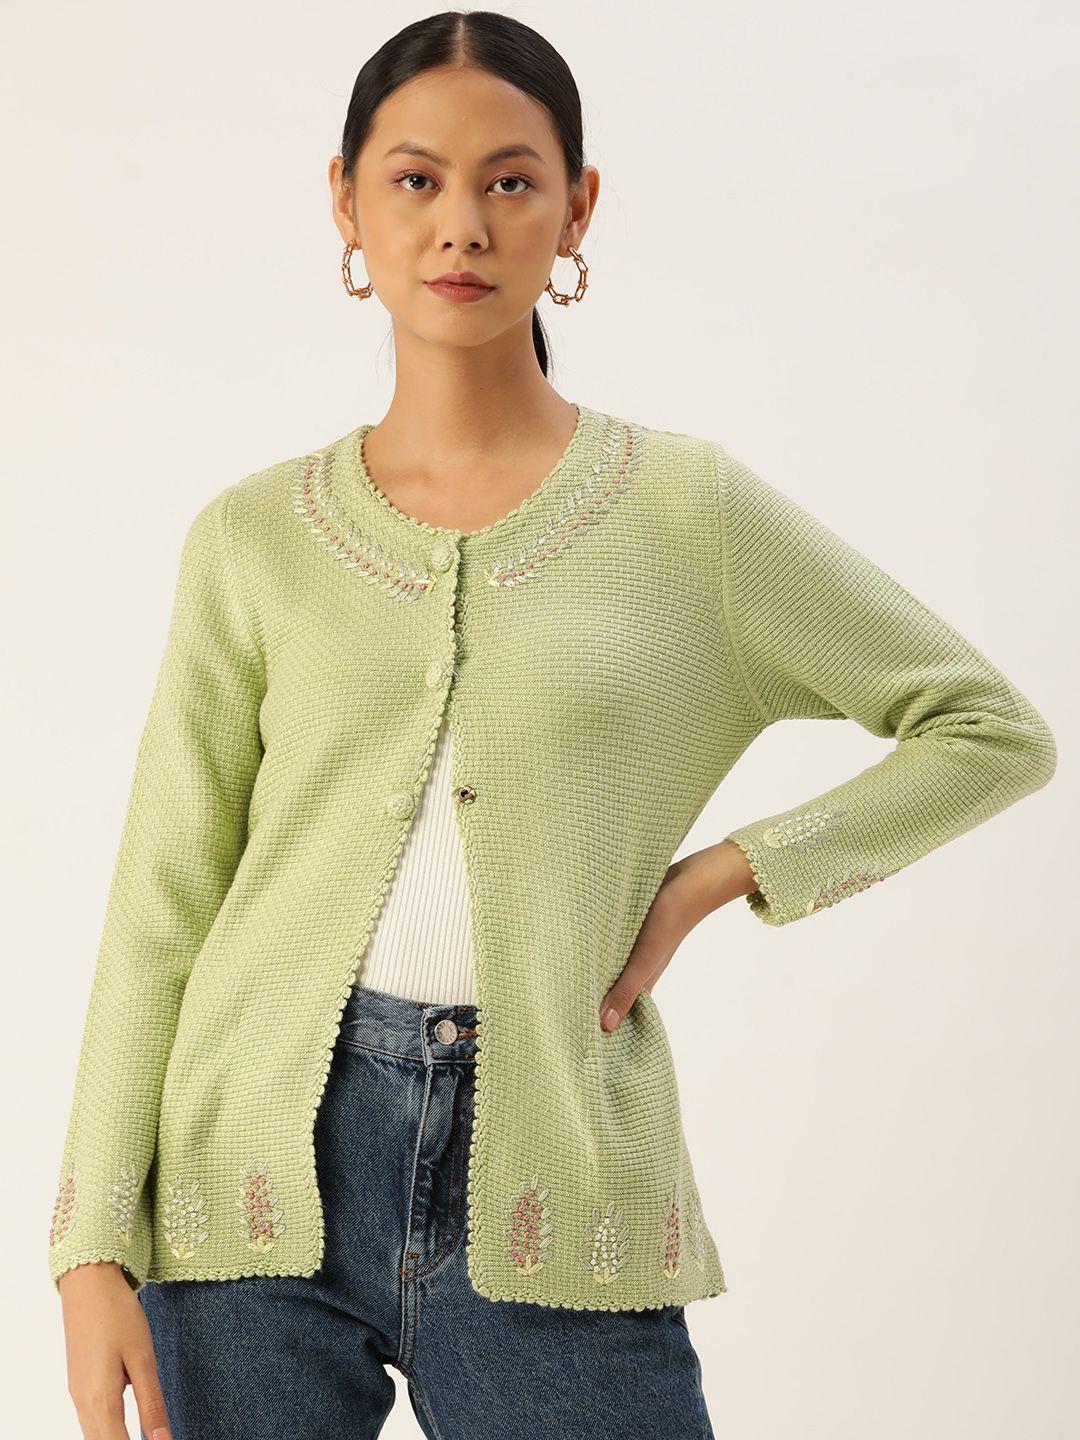 apsley women sea green cable knit cardigan